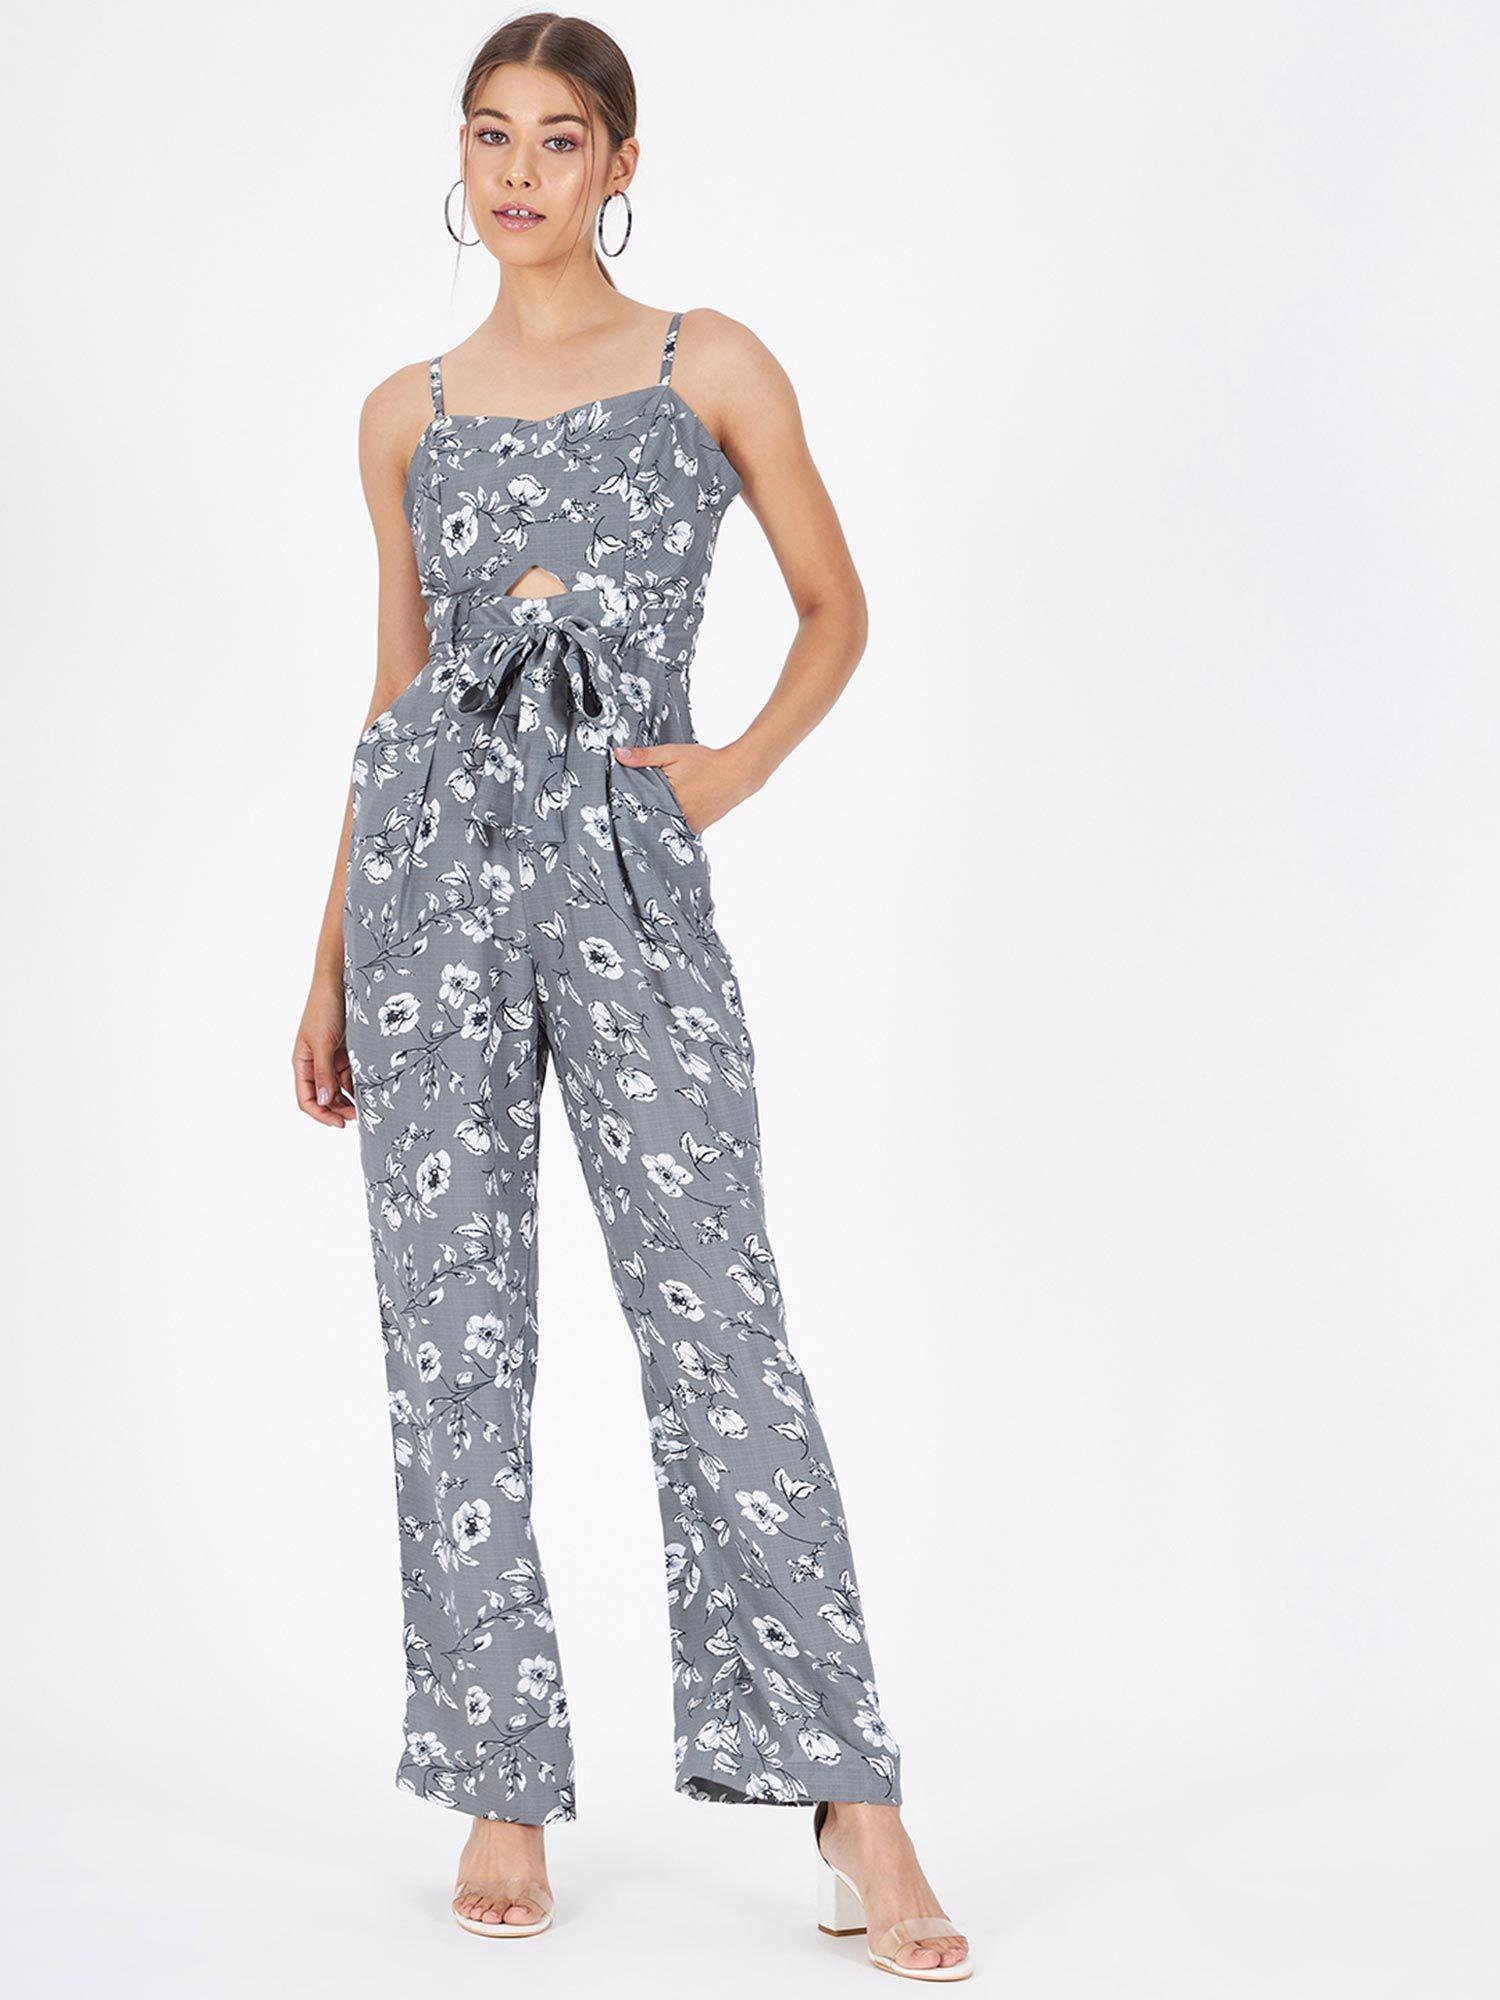 grey polyester jumpsuit for women